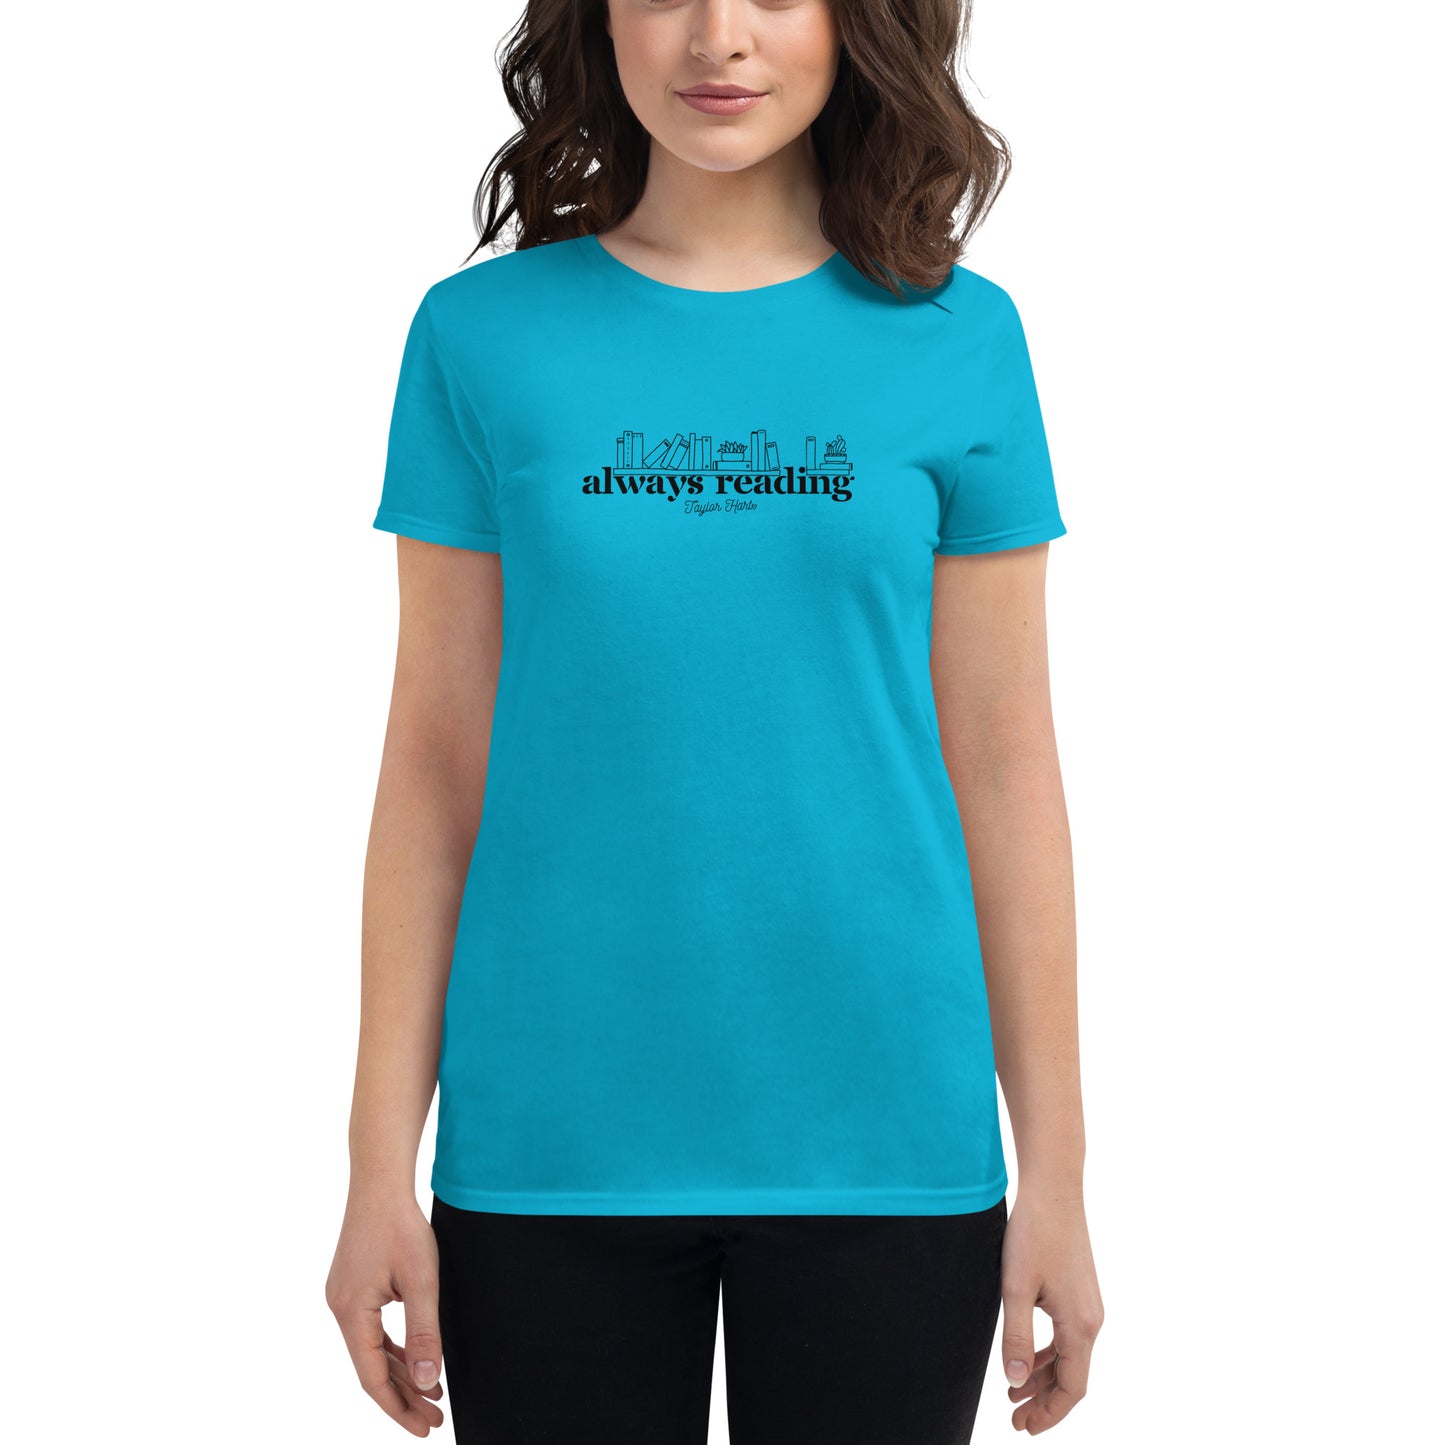 Always Reading Women's Short Sleeve Fitted Shirt